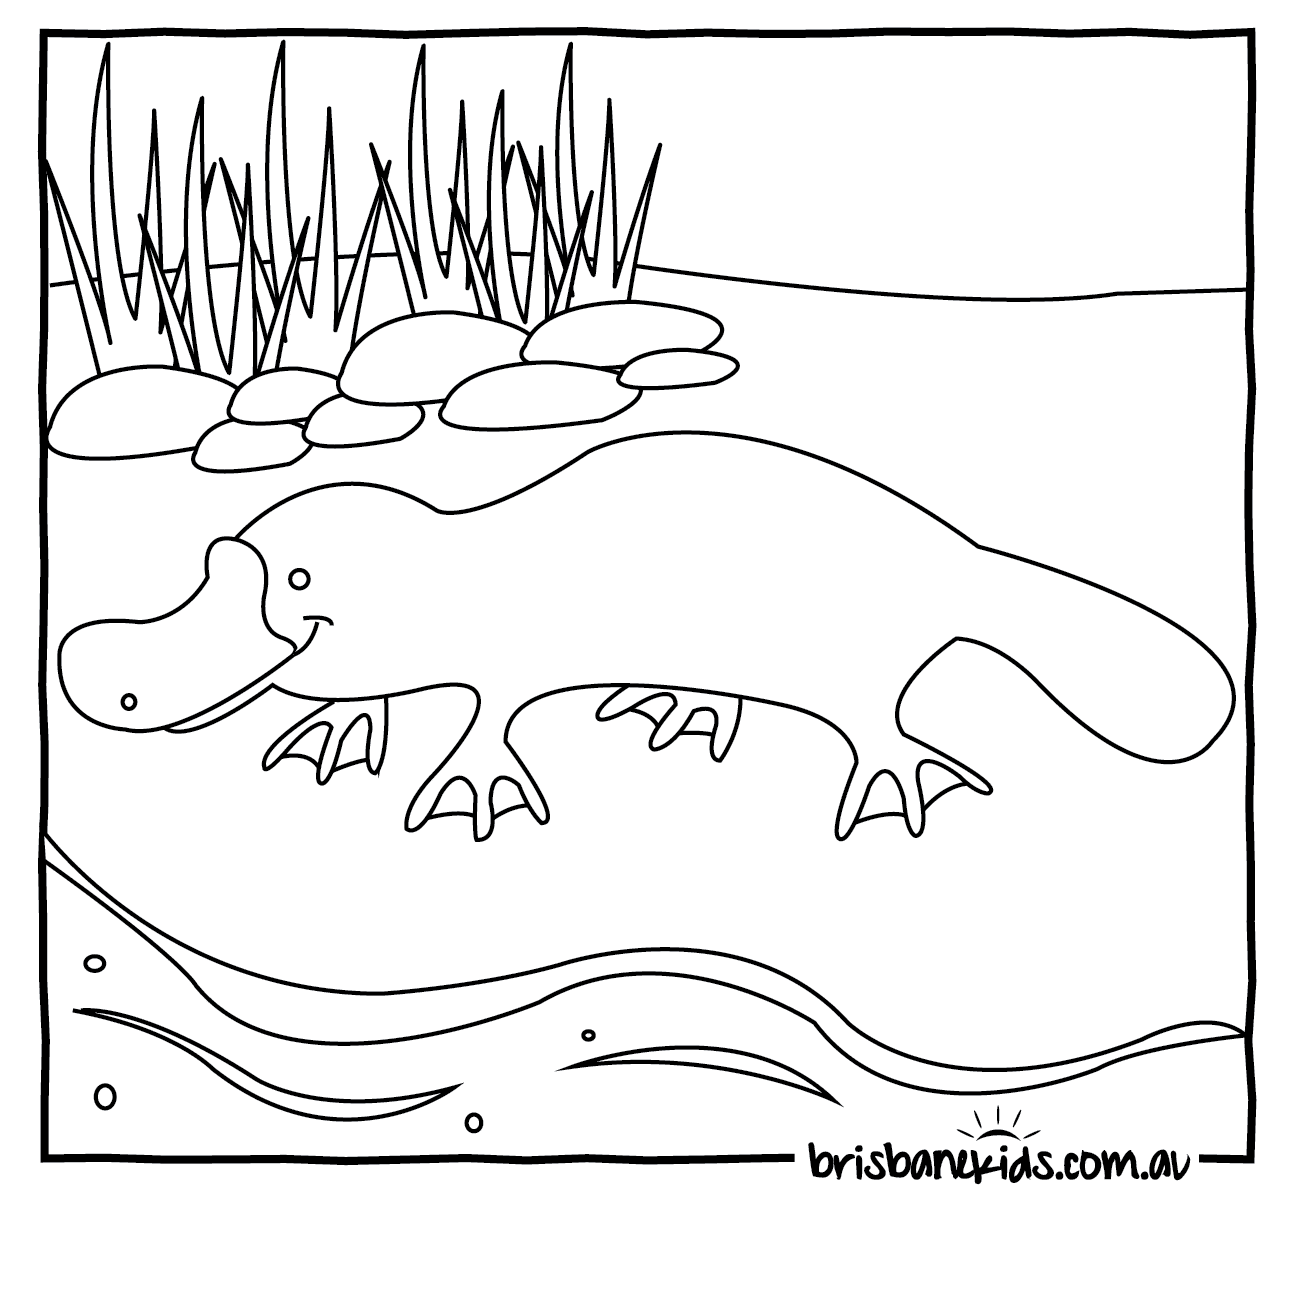 Australian Animals Colouring Pages Brisbane Kids - Free Printable Aboriginal Colouring Pages